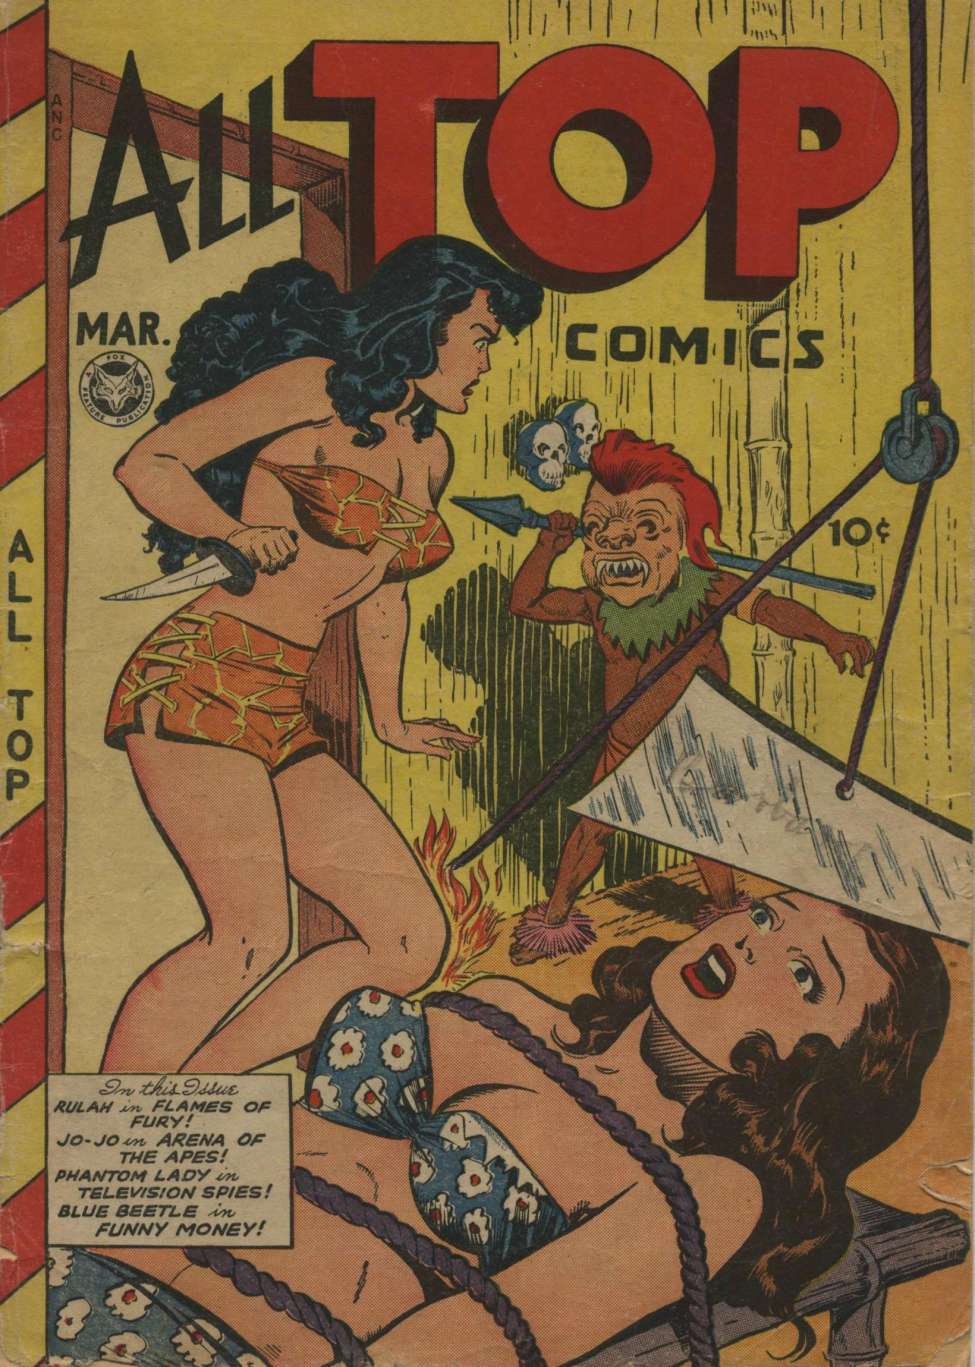 Book Cover For All Top Comics 10